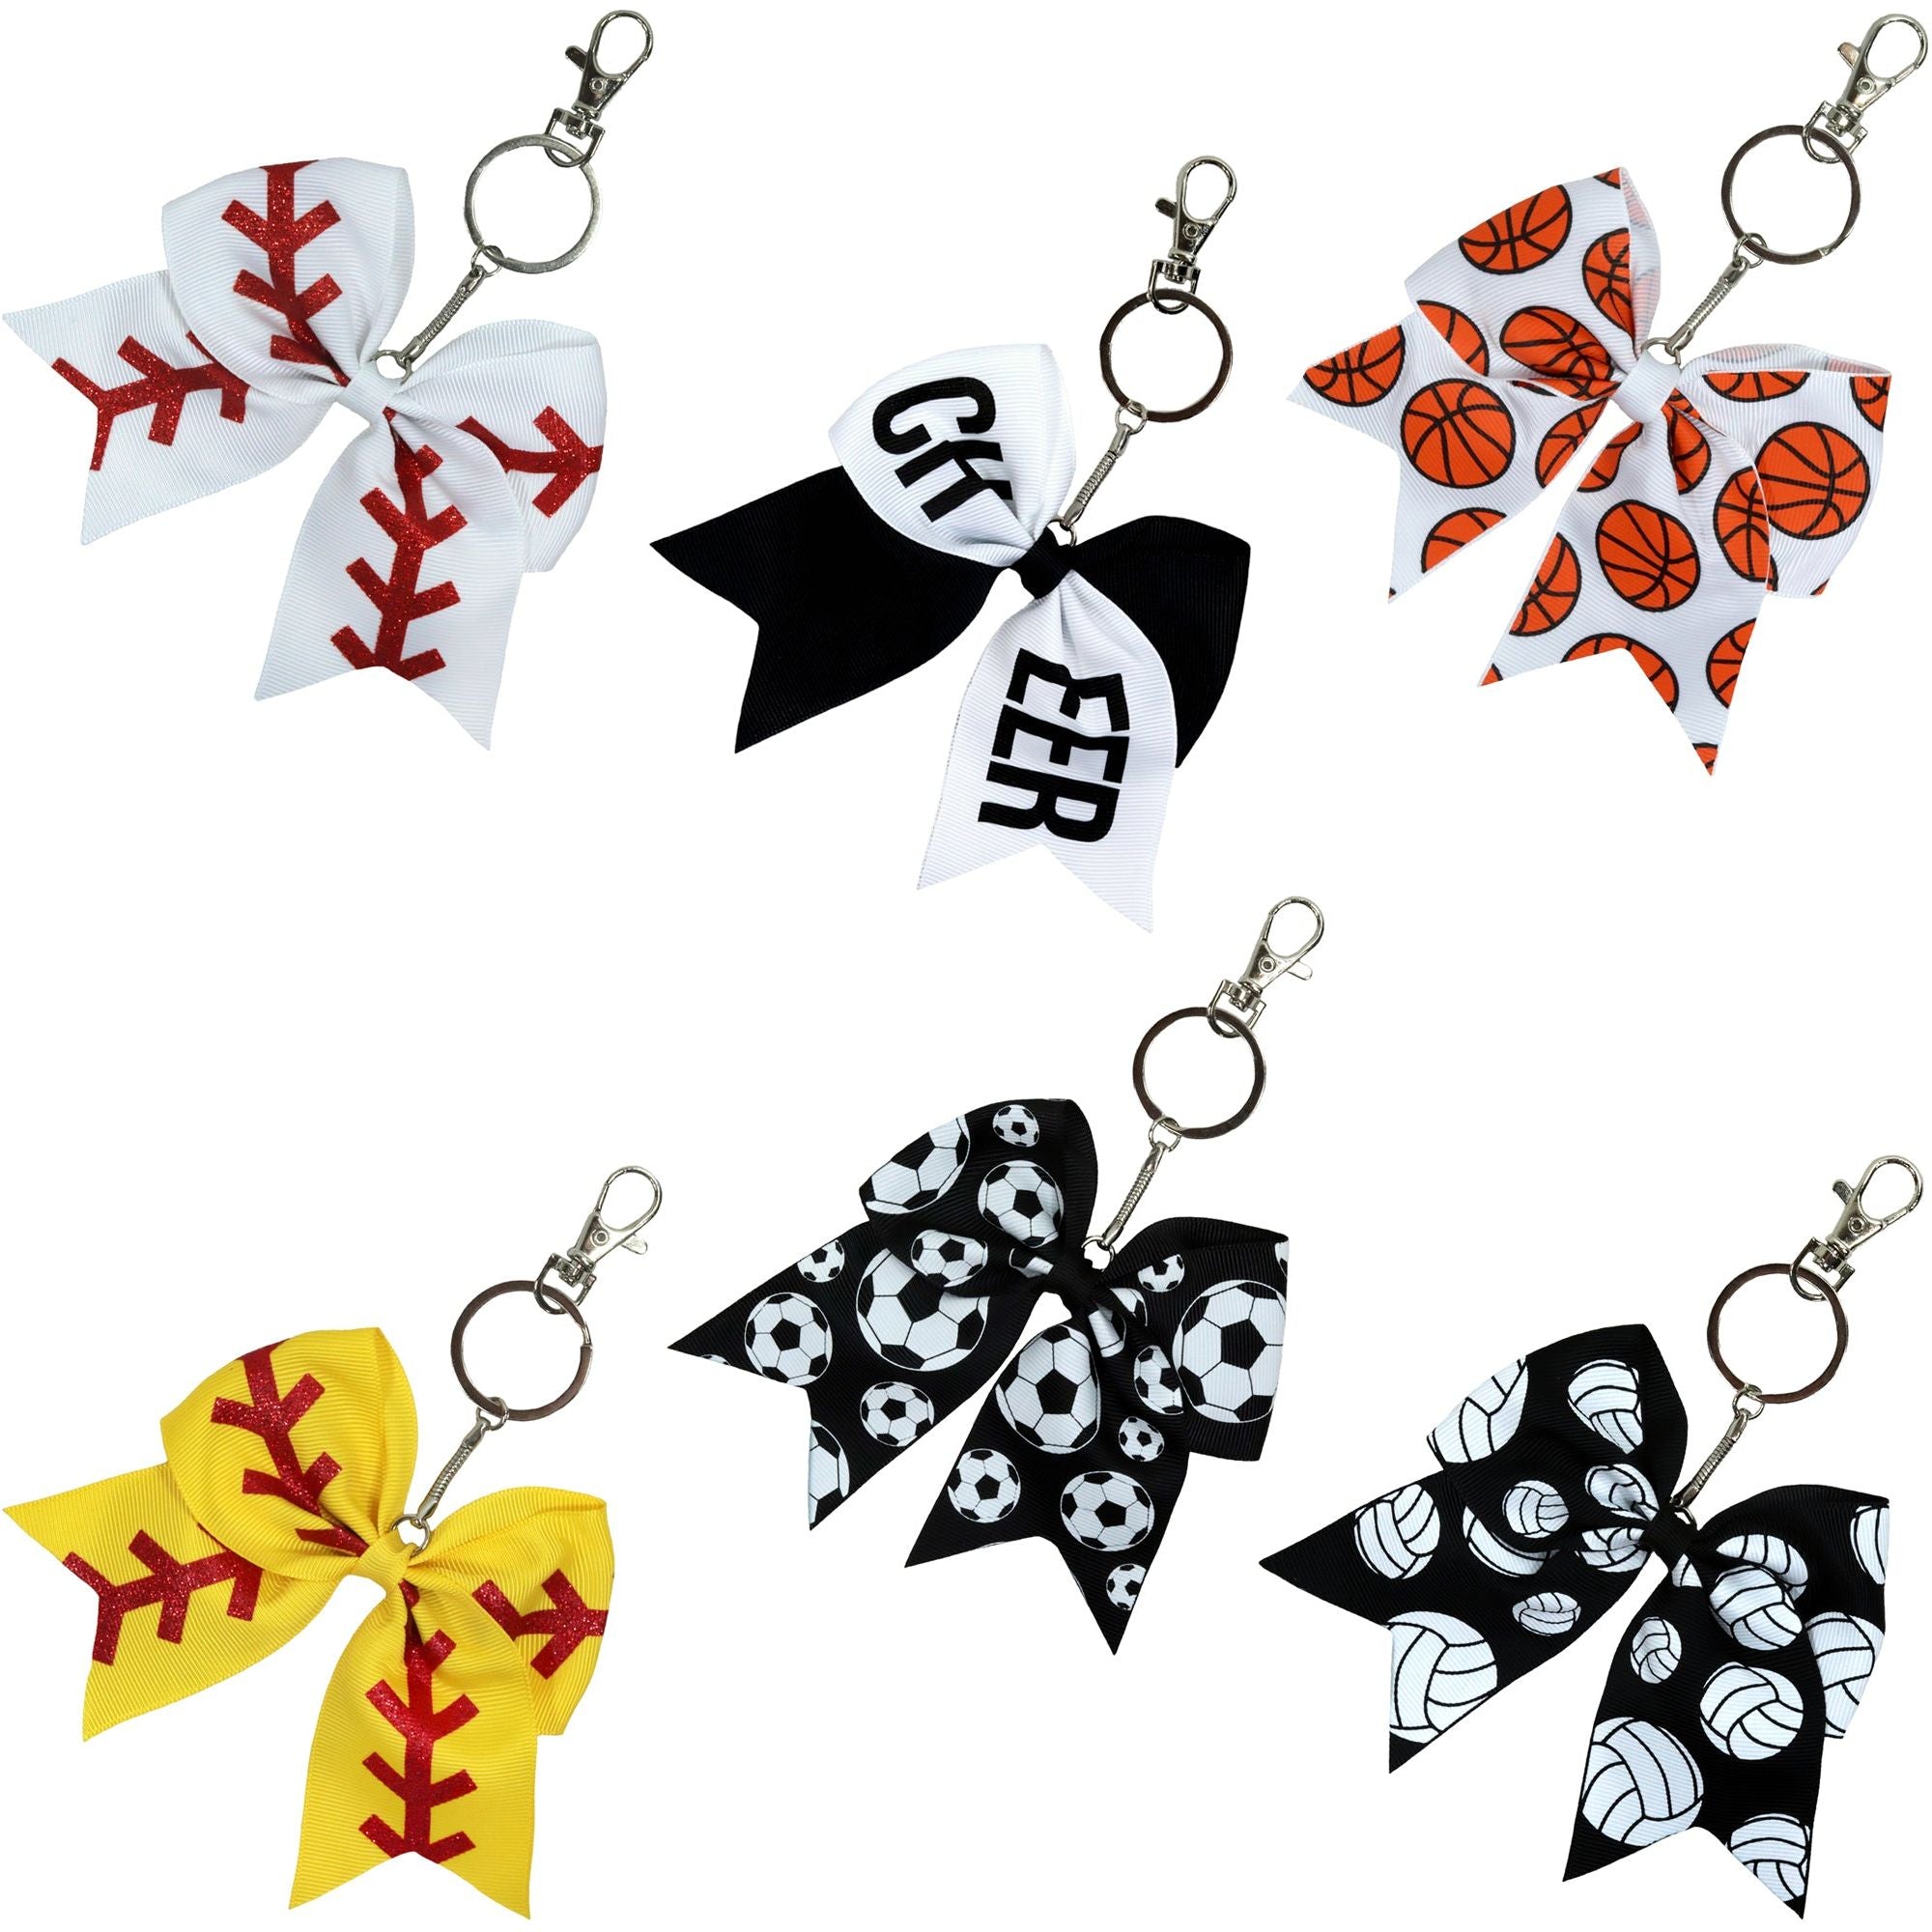 Printable Keychain and Accessory Mini Cheer Bow Template And Loop Grap –  Cheer Bow Supply